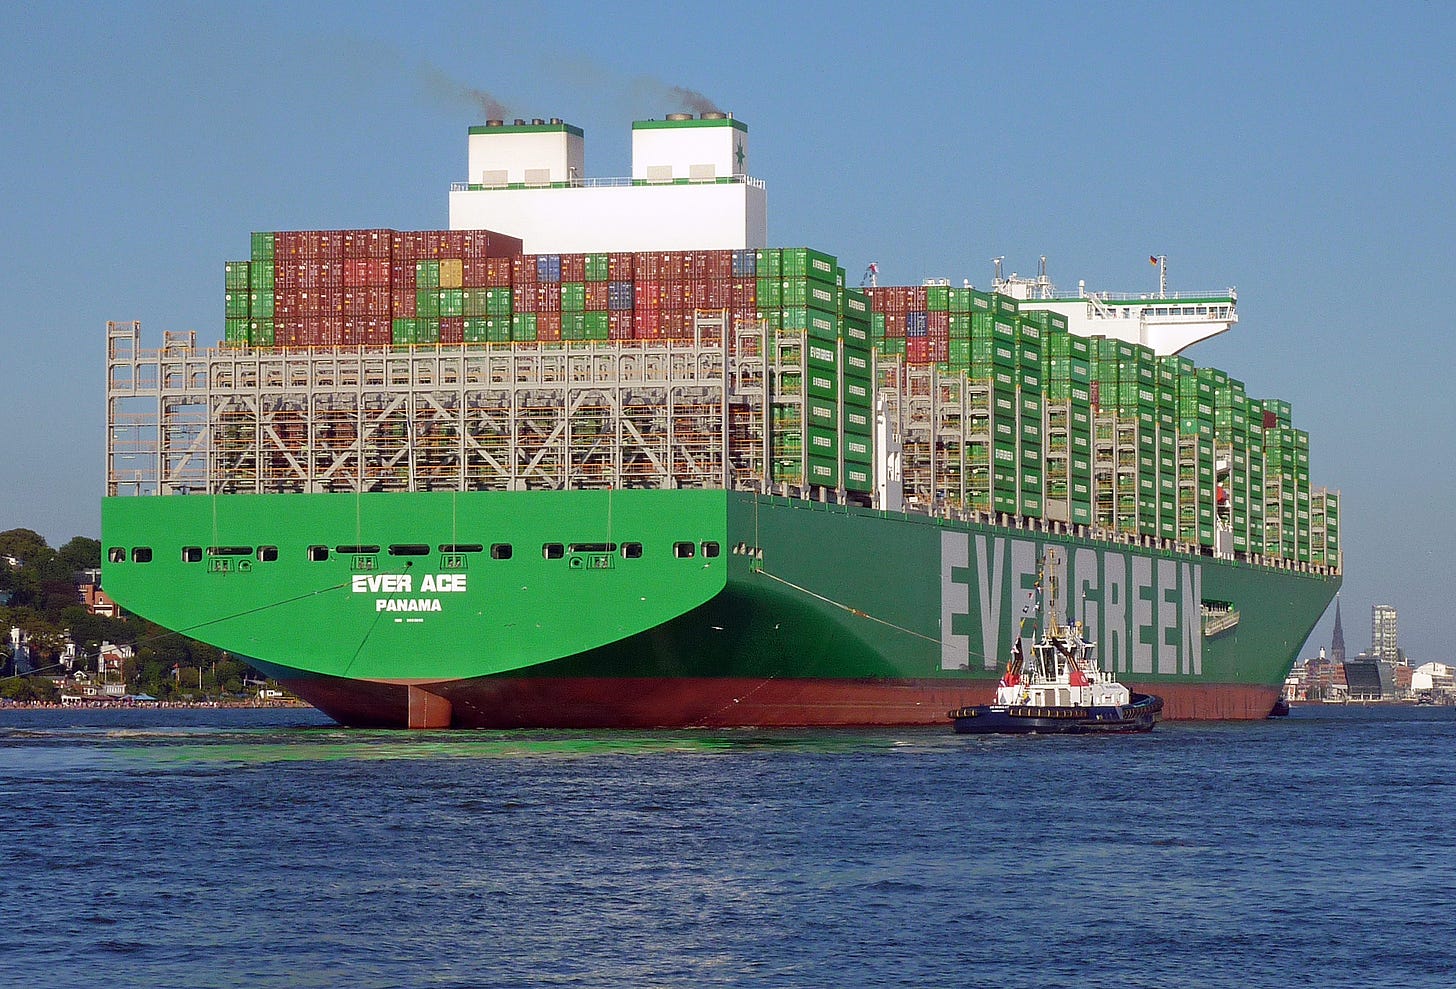 Evergreen A-class container ship - Wikipedia